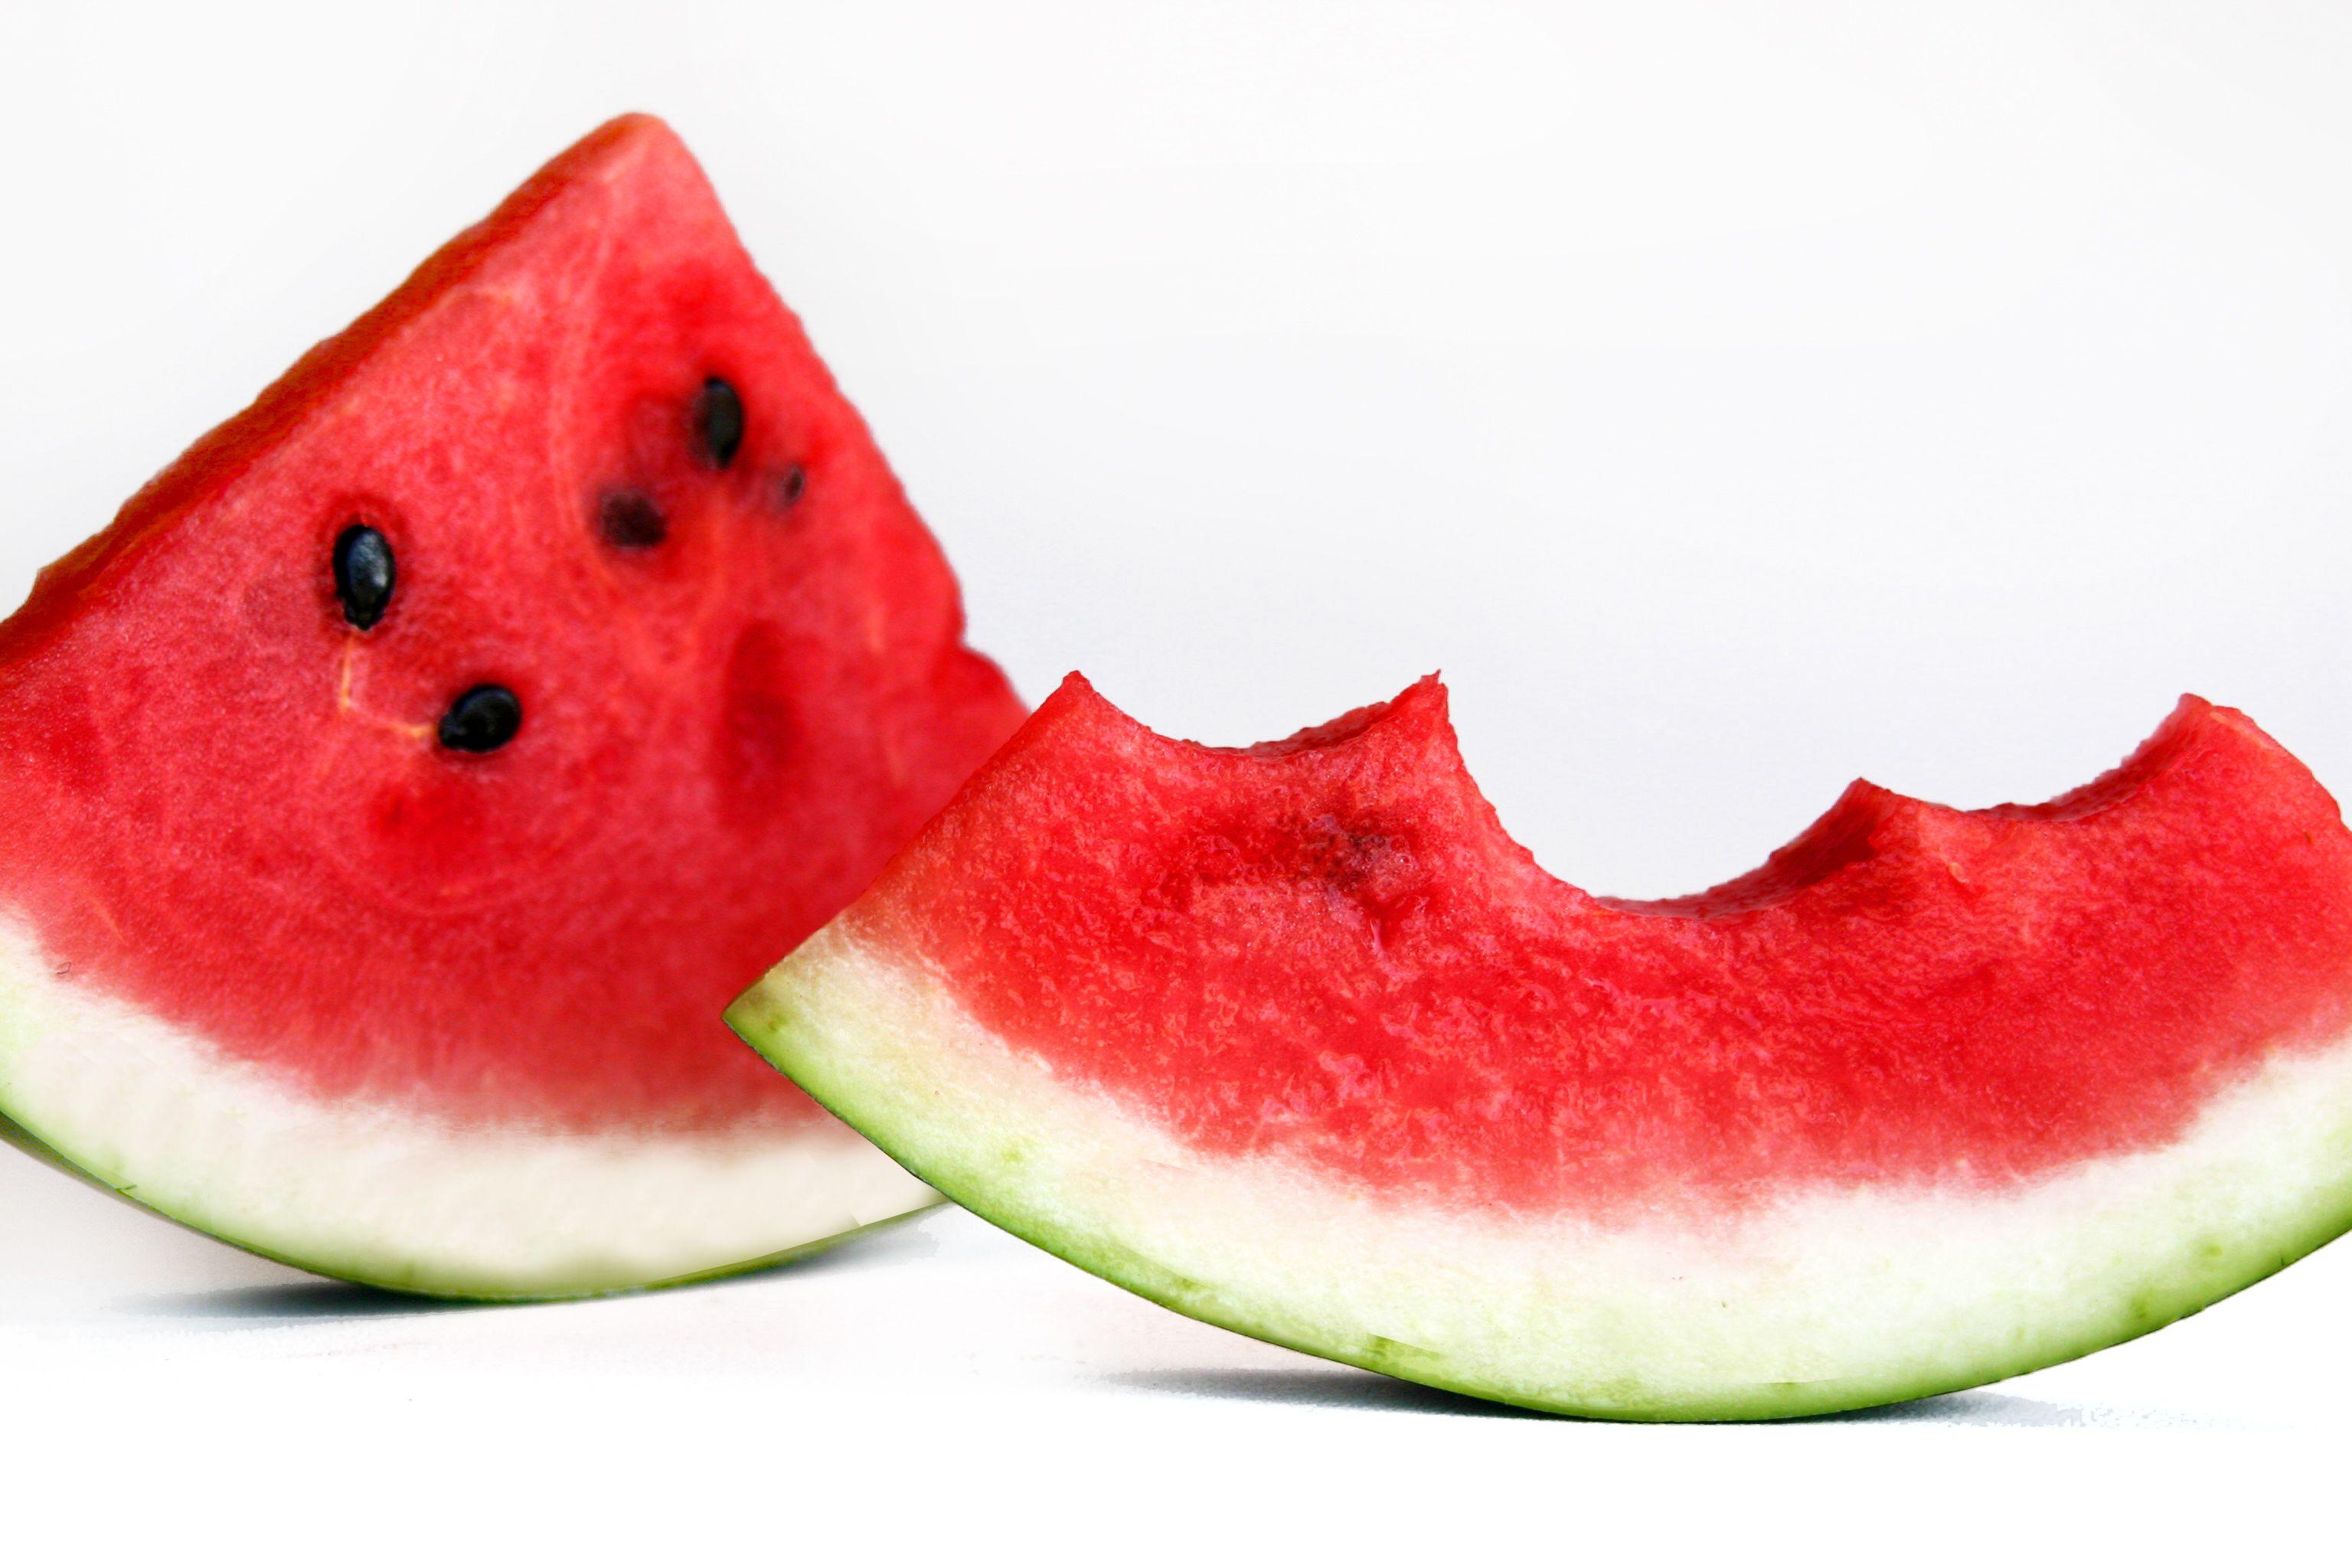 4K Watermelons Wallpaper High Quality